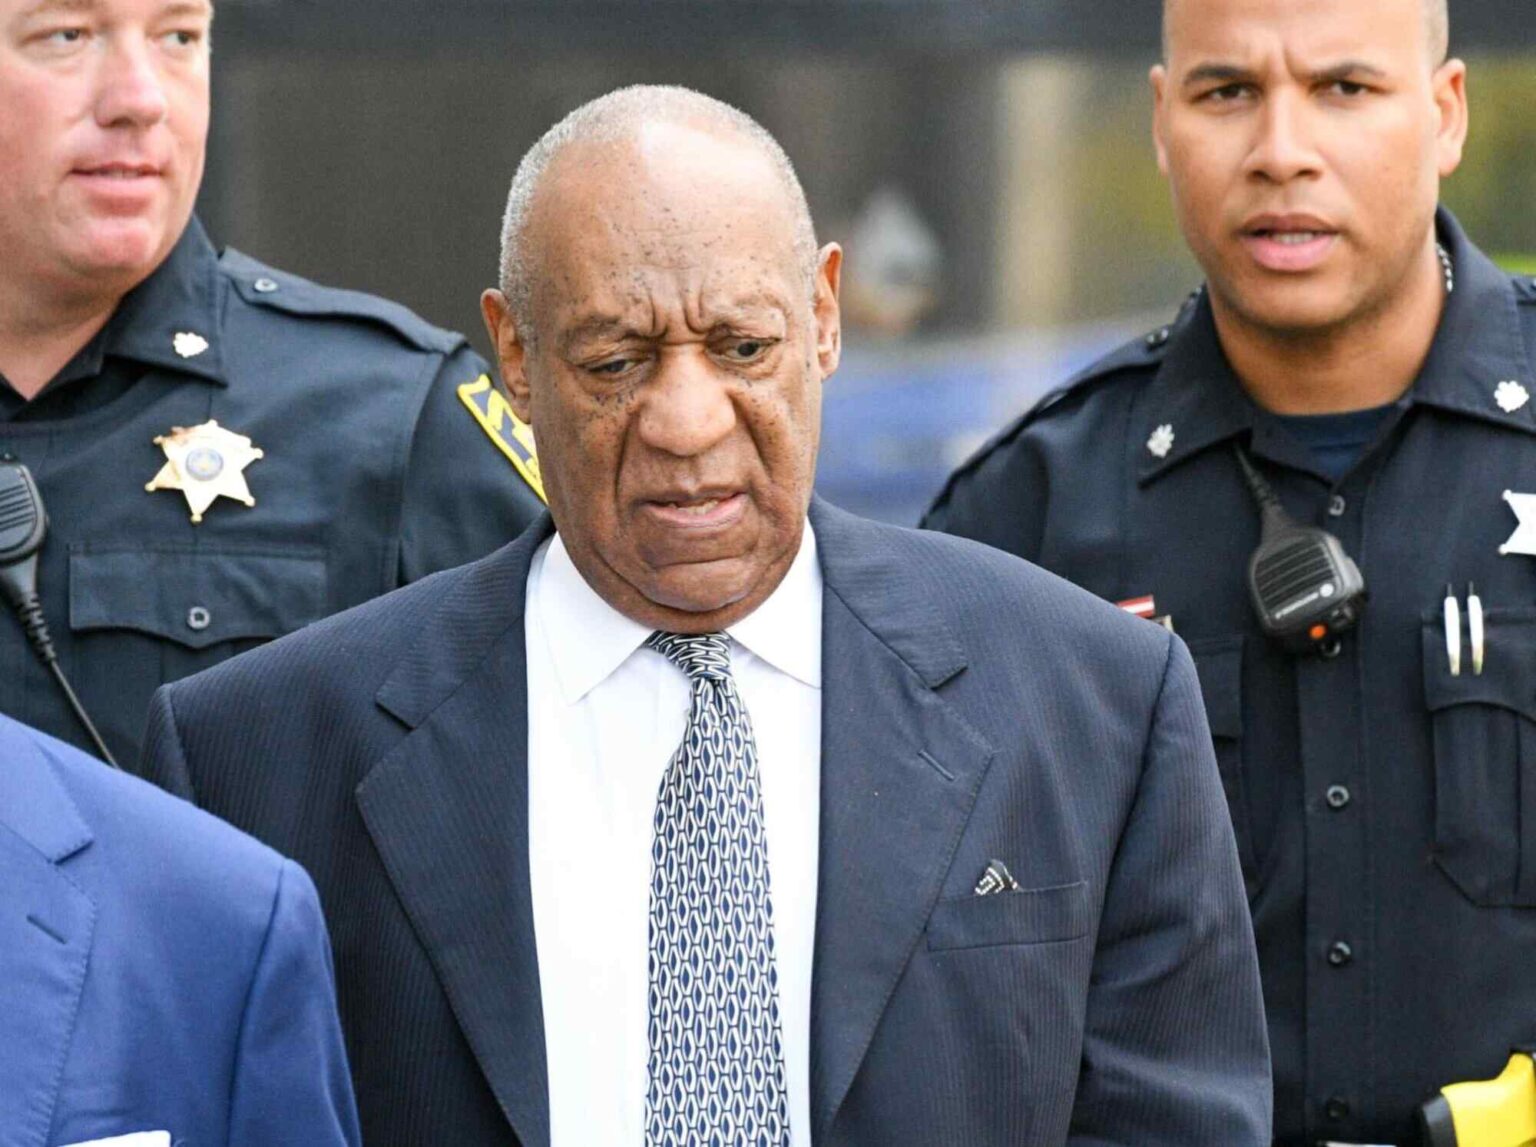 Is this the final act for Cosby, or just another twist in an ongoing saga? Look at the newest details.